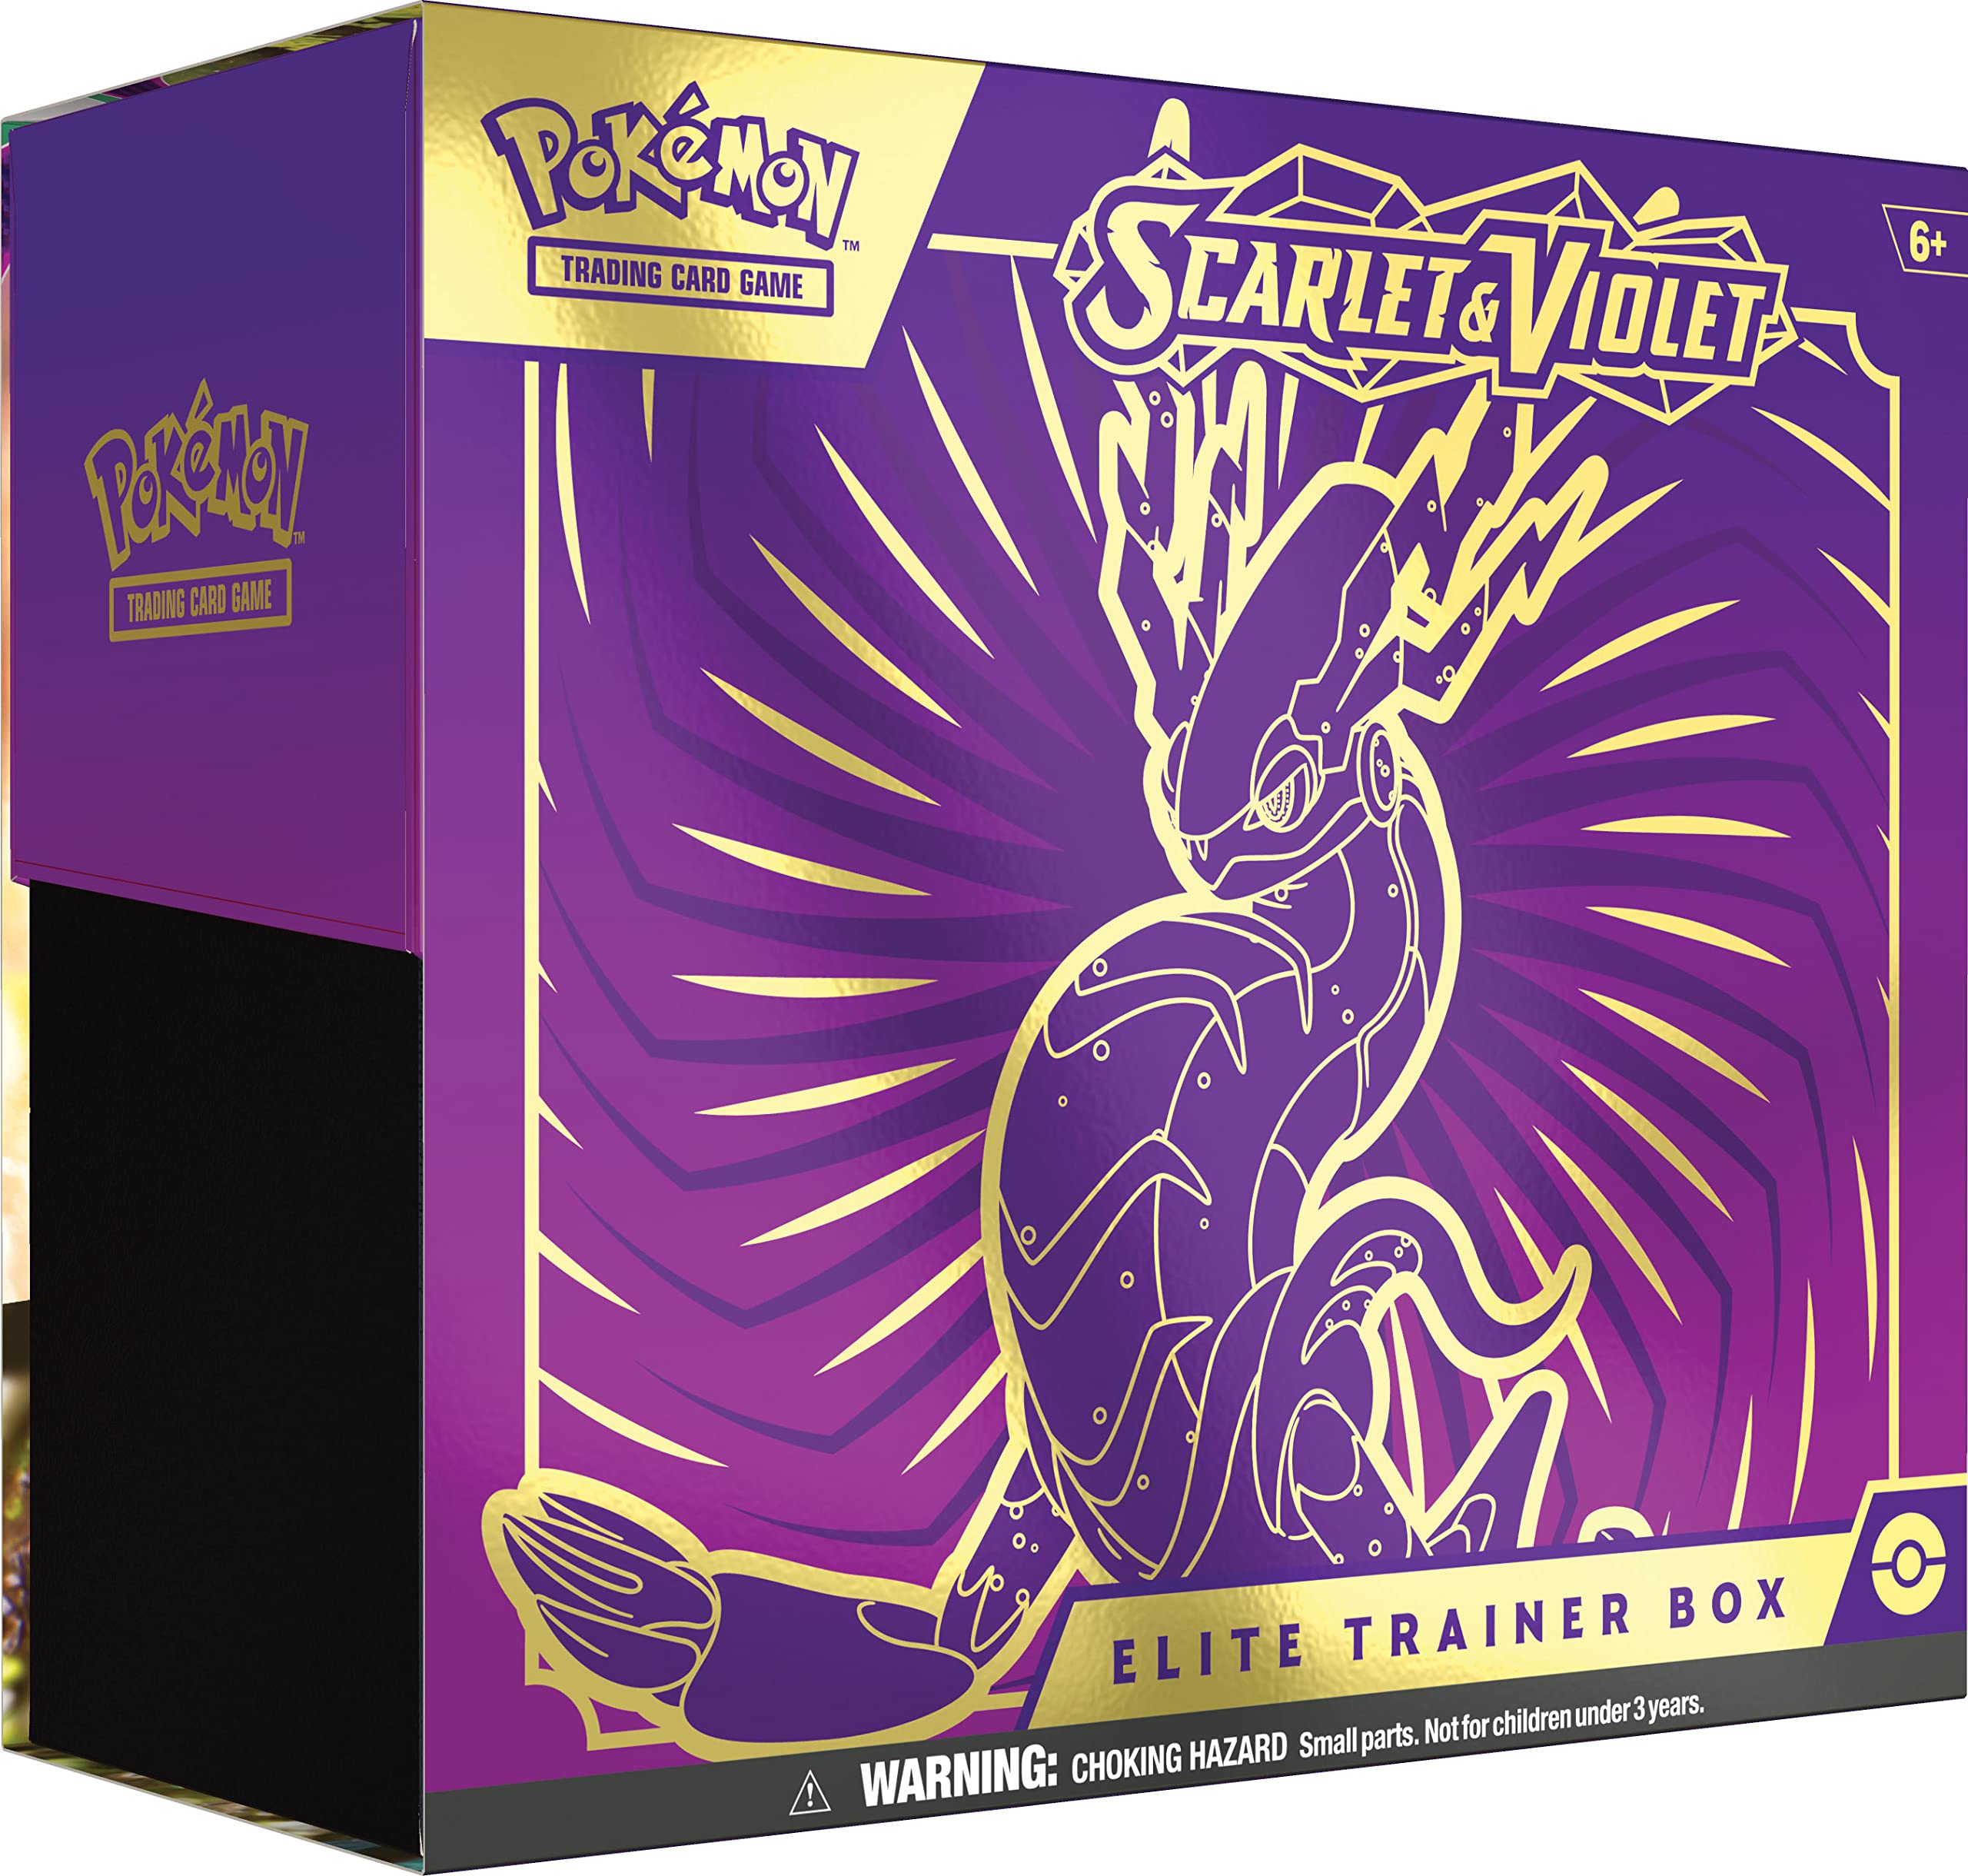 Pokemon TCG: Scarlet and Violet Elite Trainer Box - Miraidon Purple (1 Full Art Promo Card, 9 Boosters and Premium Accessories)